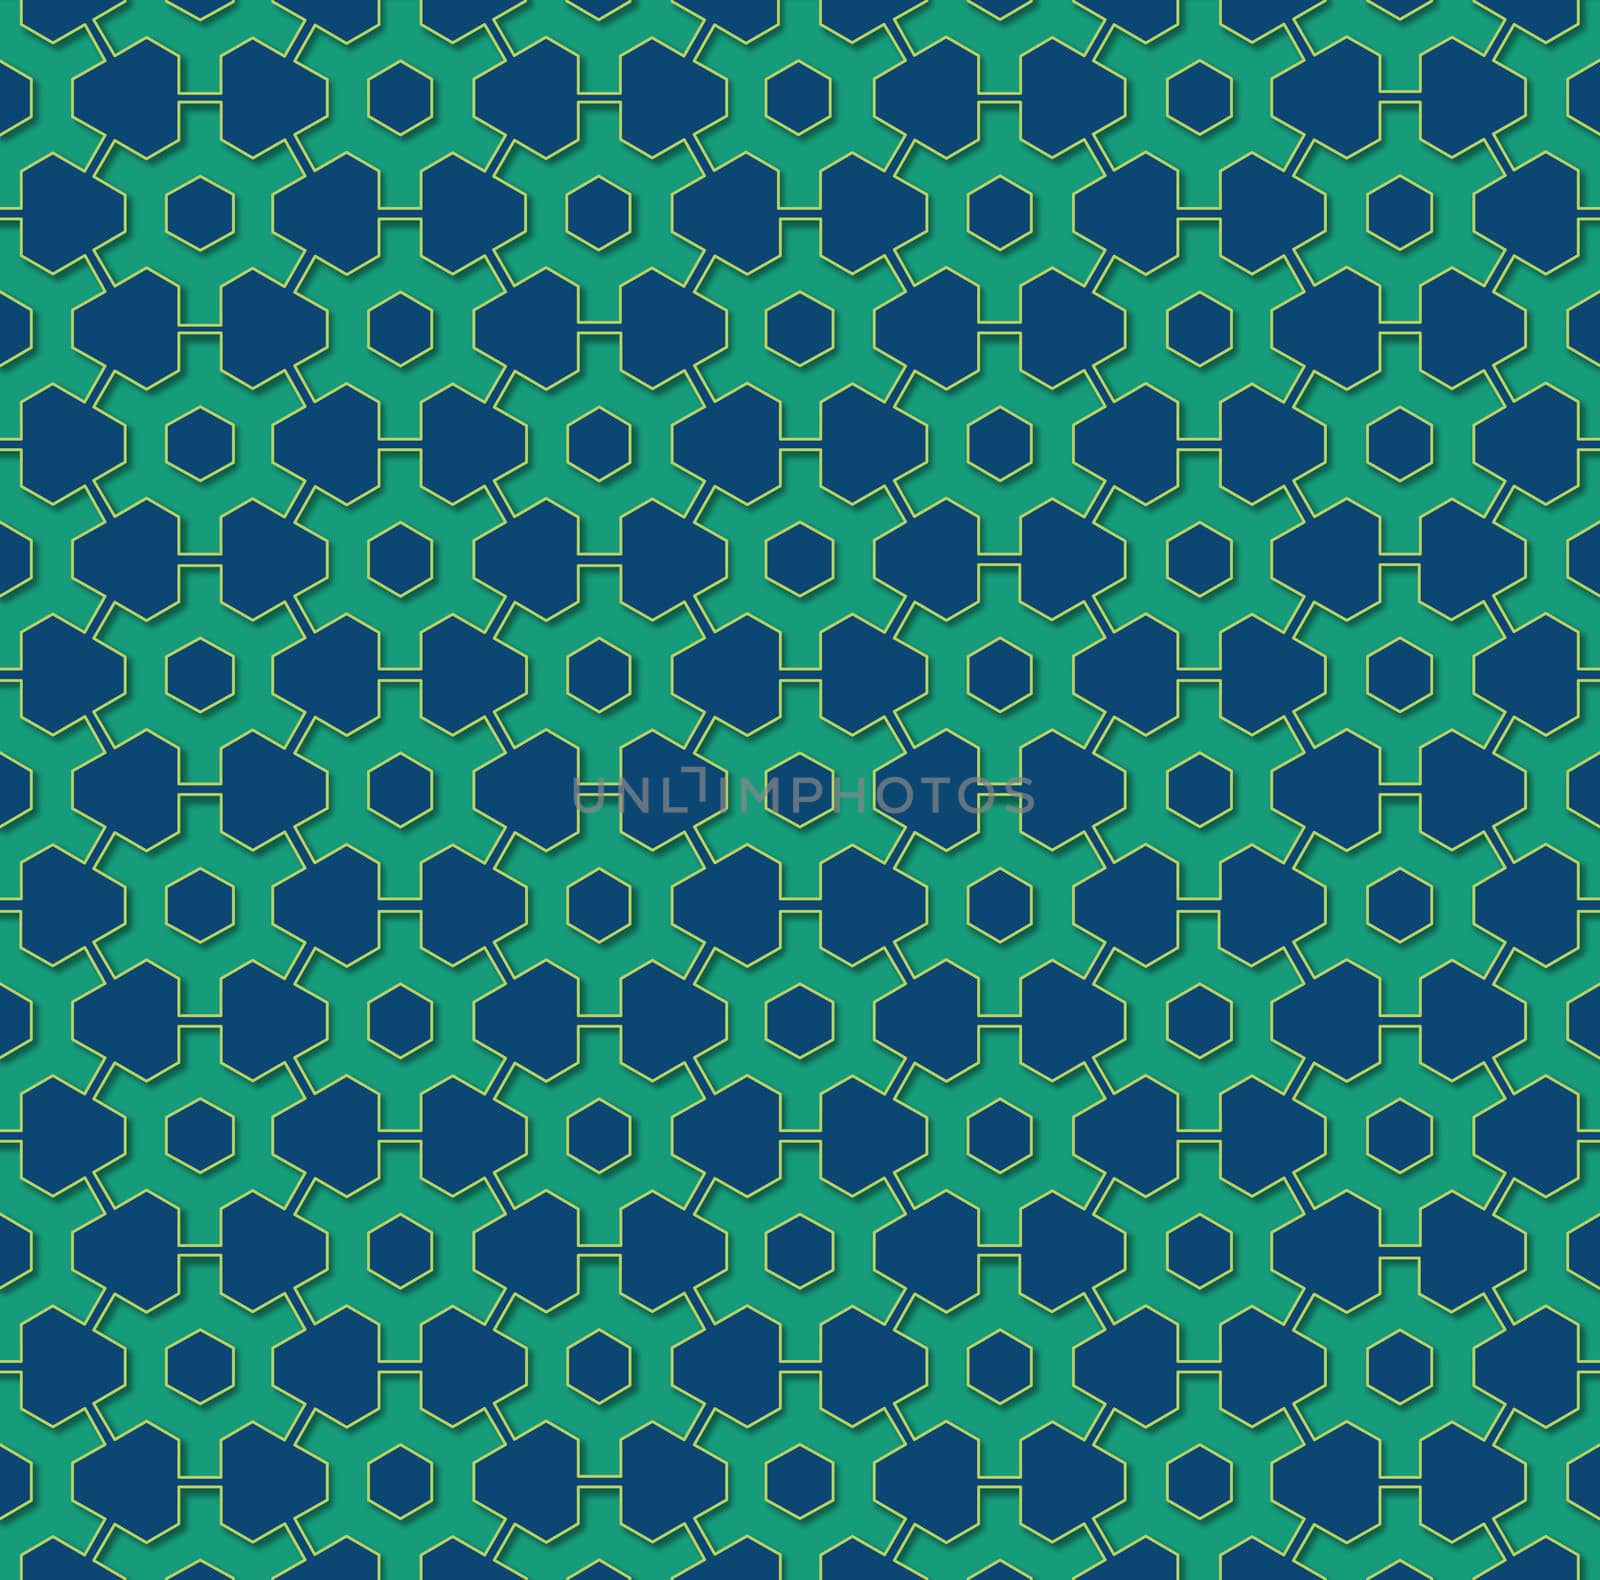 pattern or texture blue and emerald green gear wheels